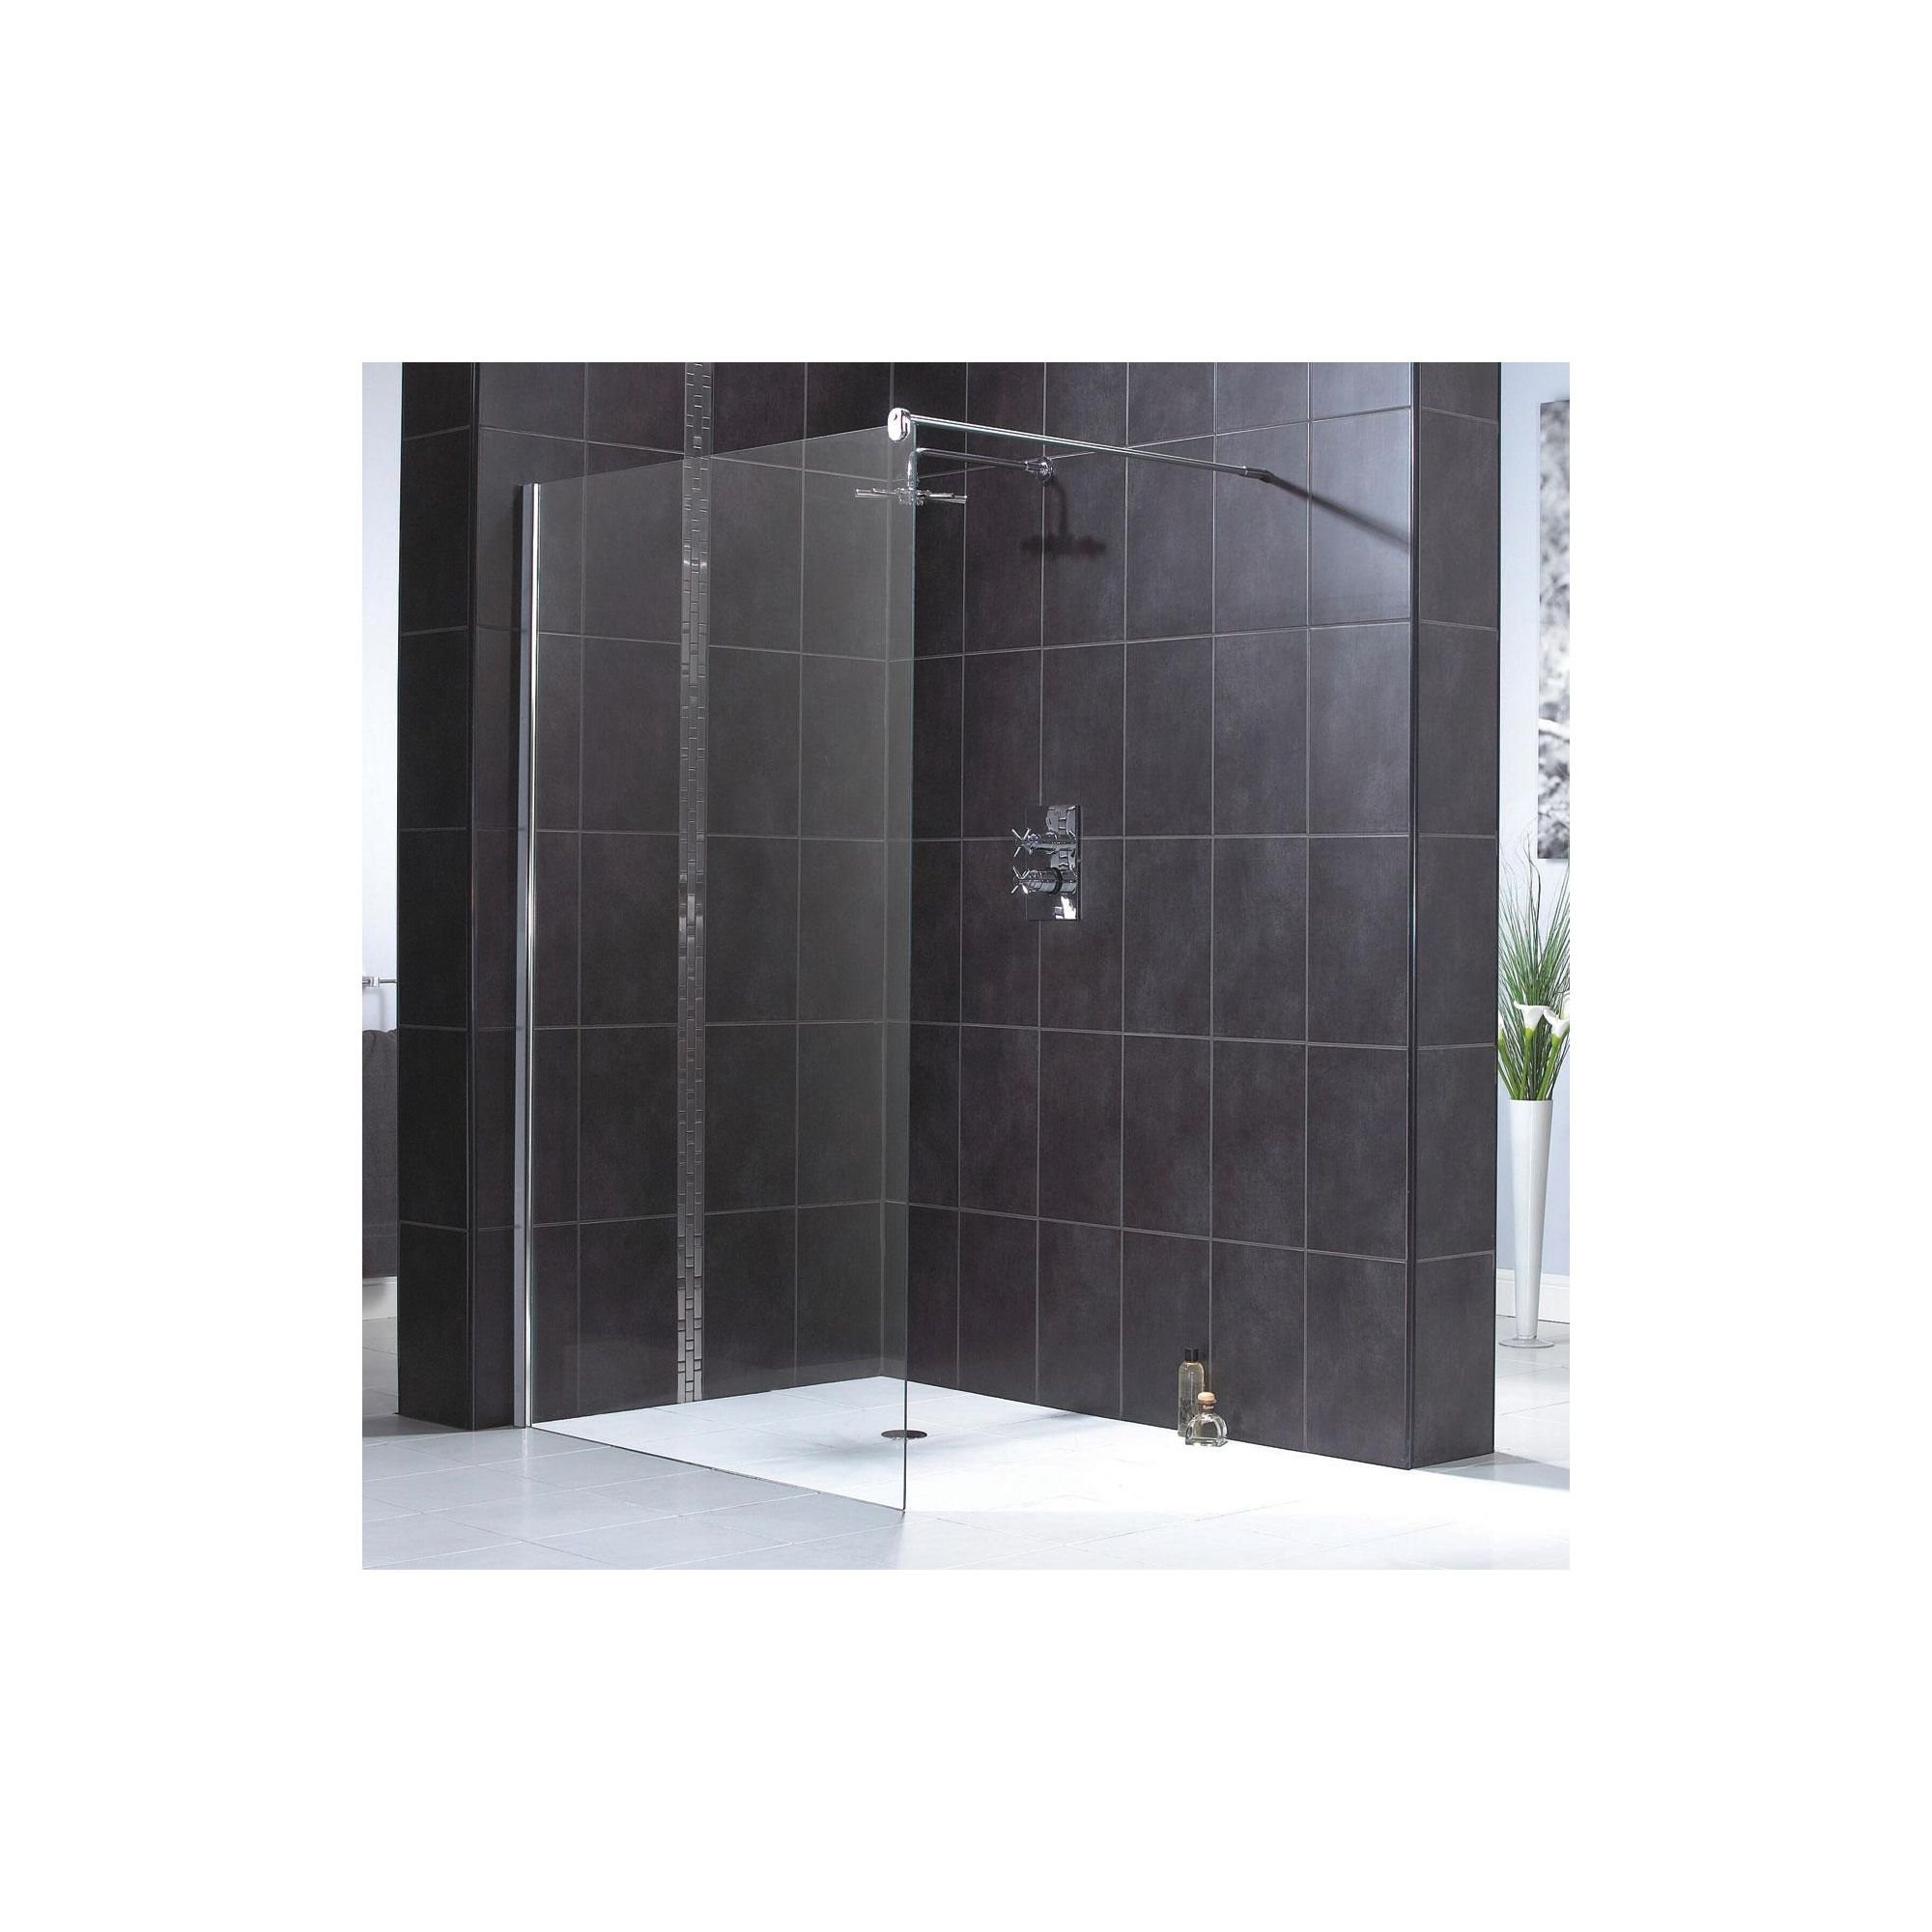 Aqualux Shine Wet Room Glass Shower Panel, 1200mm Wide, 6mm Glass at Tesco Direct